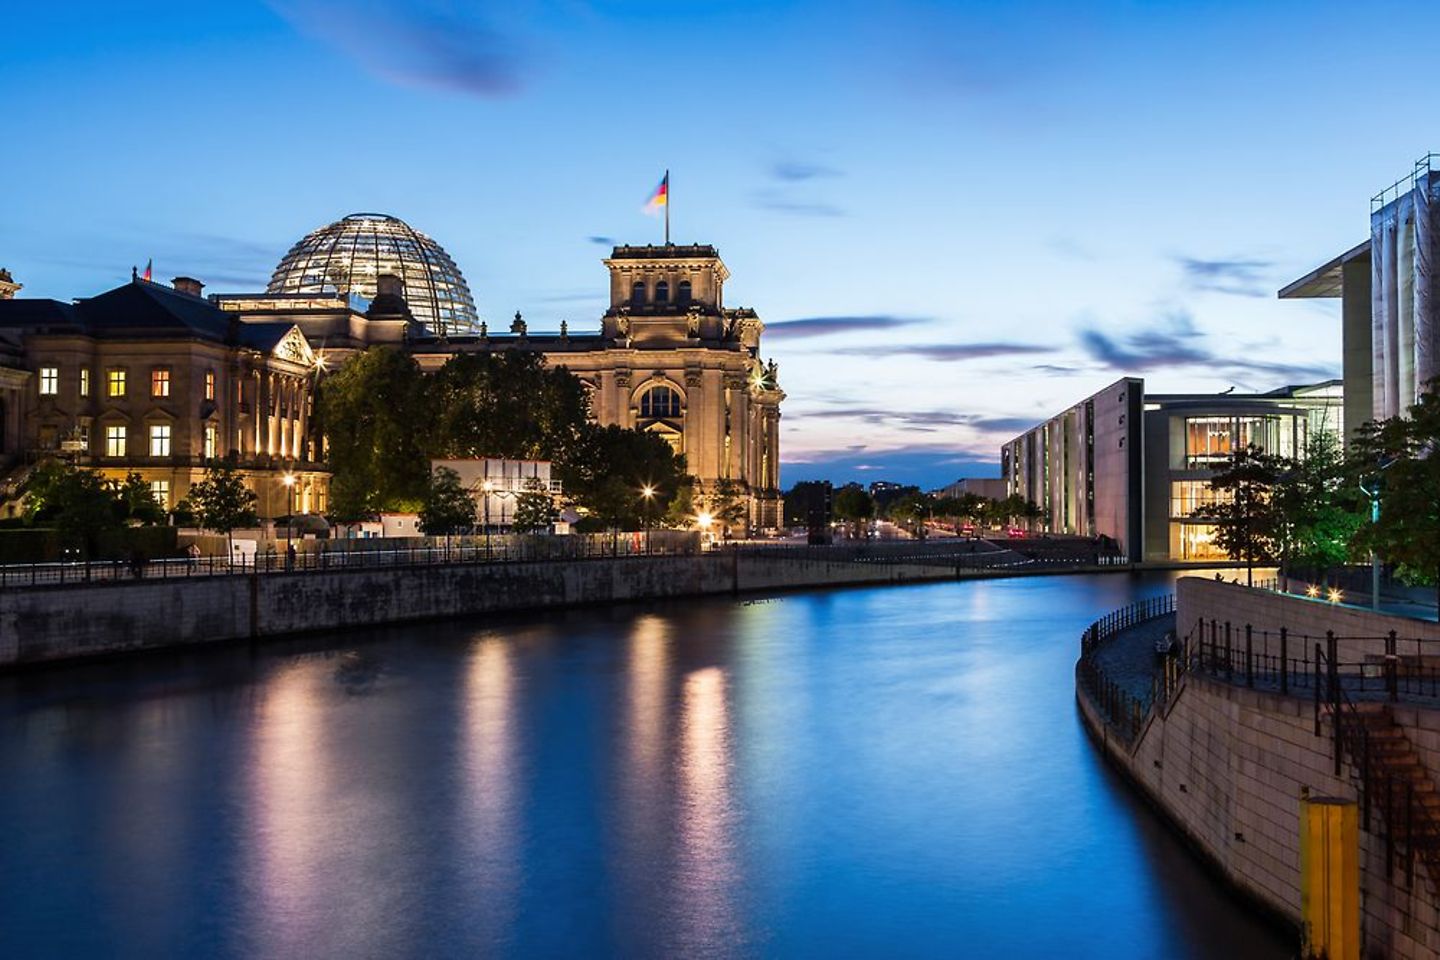 Berlin Reichstag government building